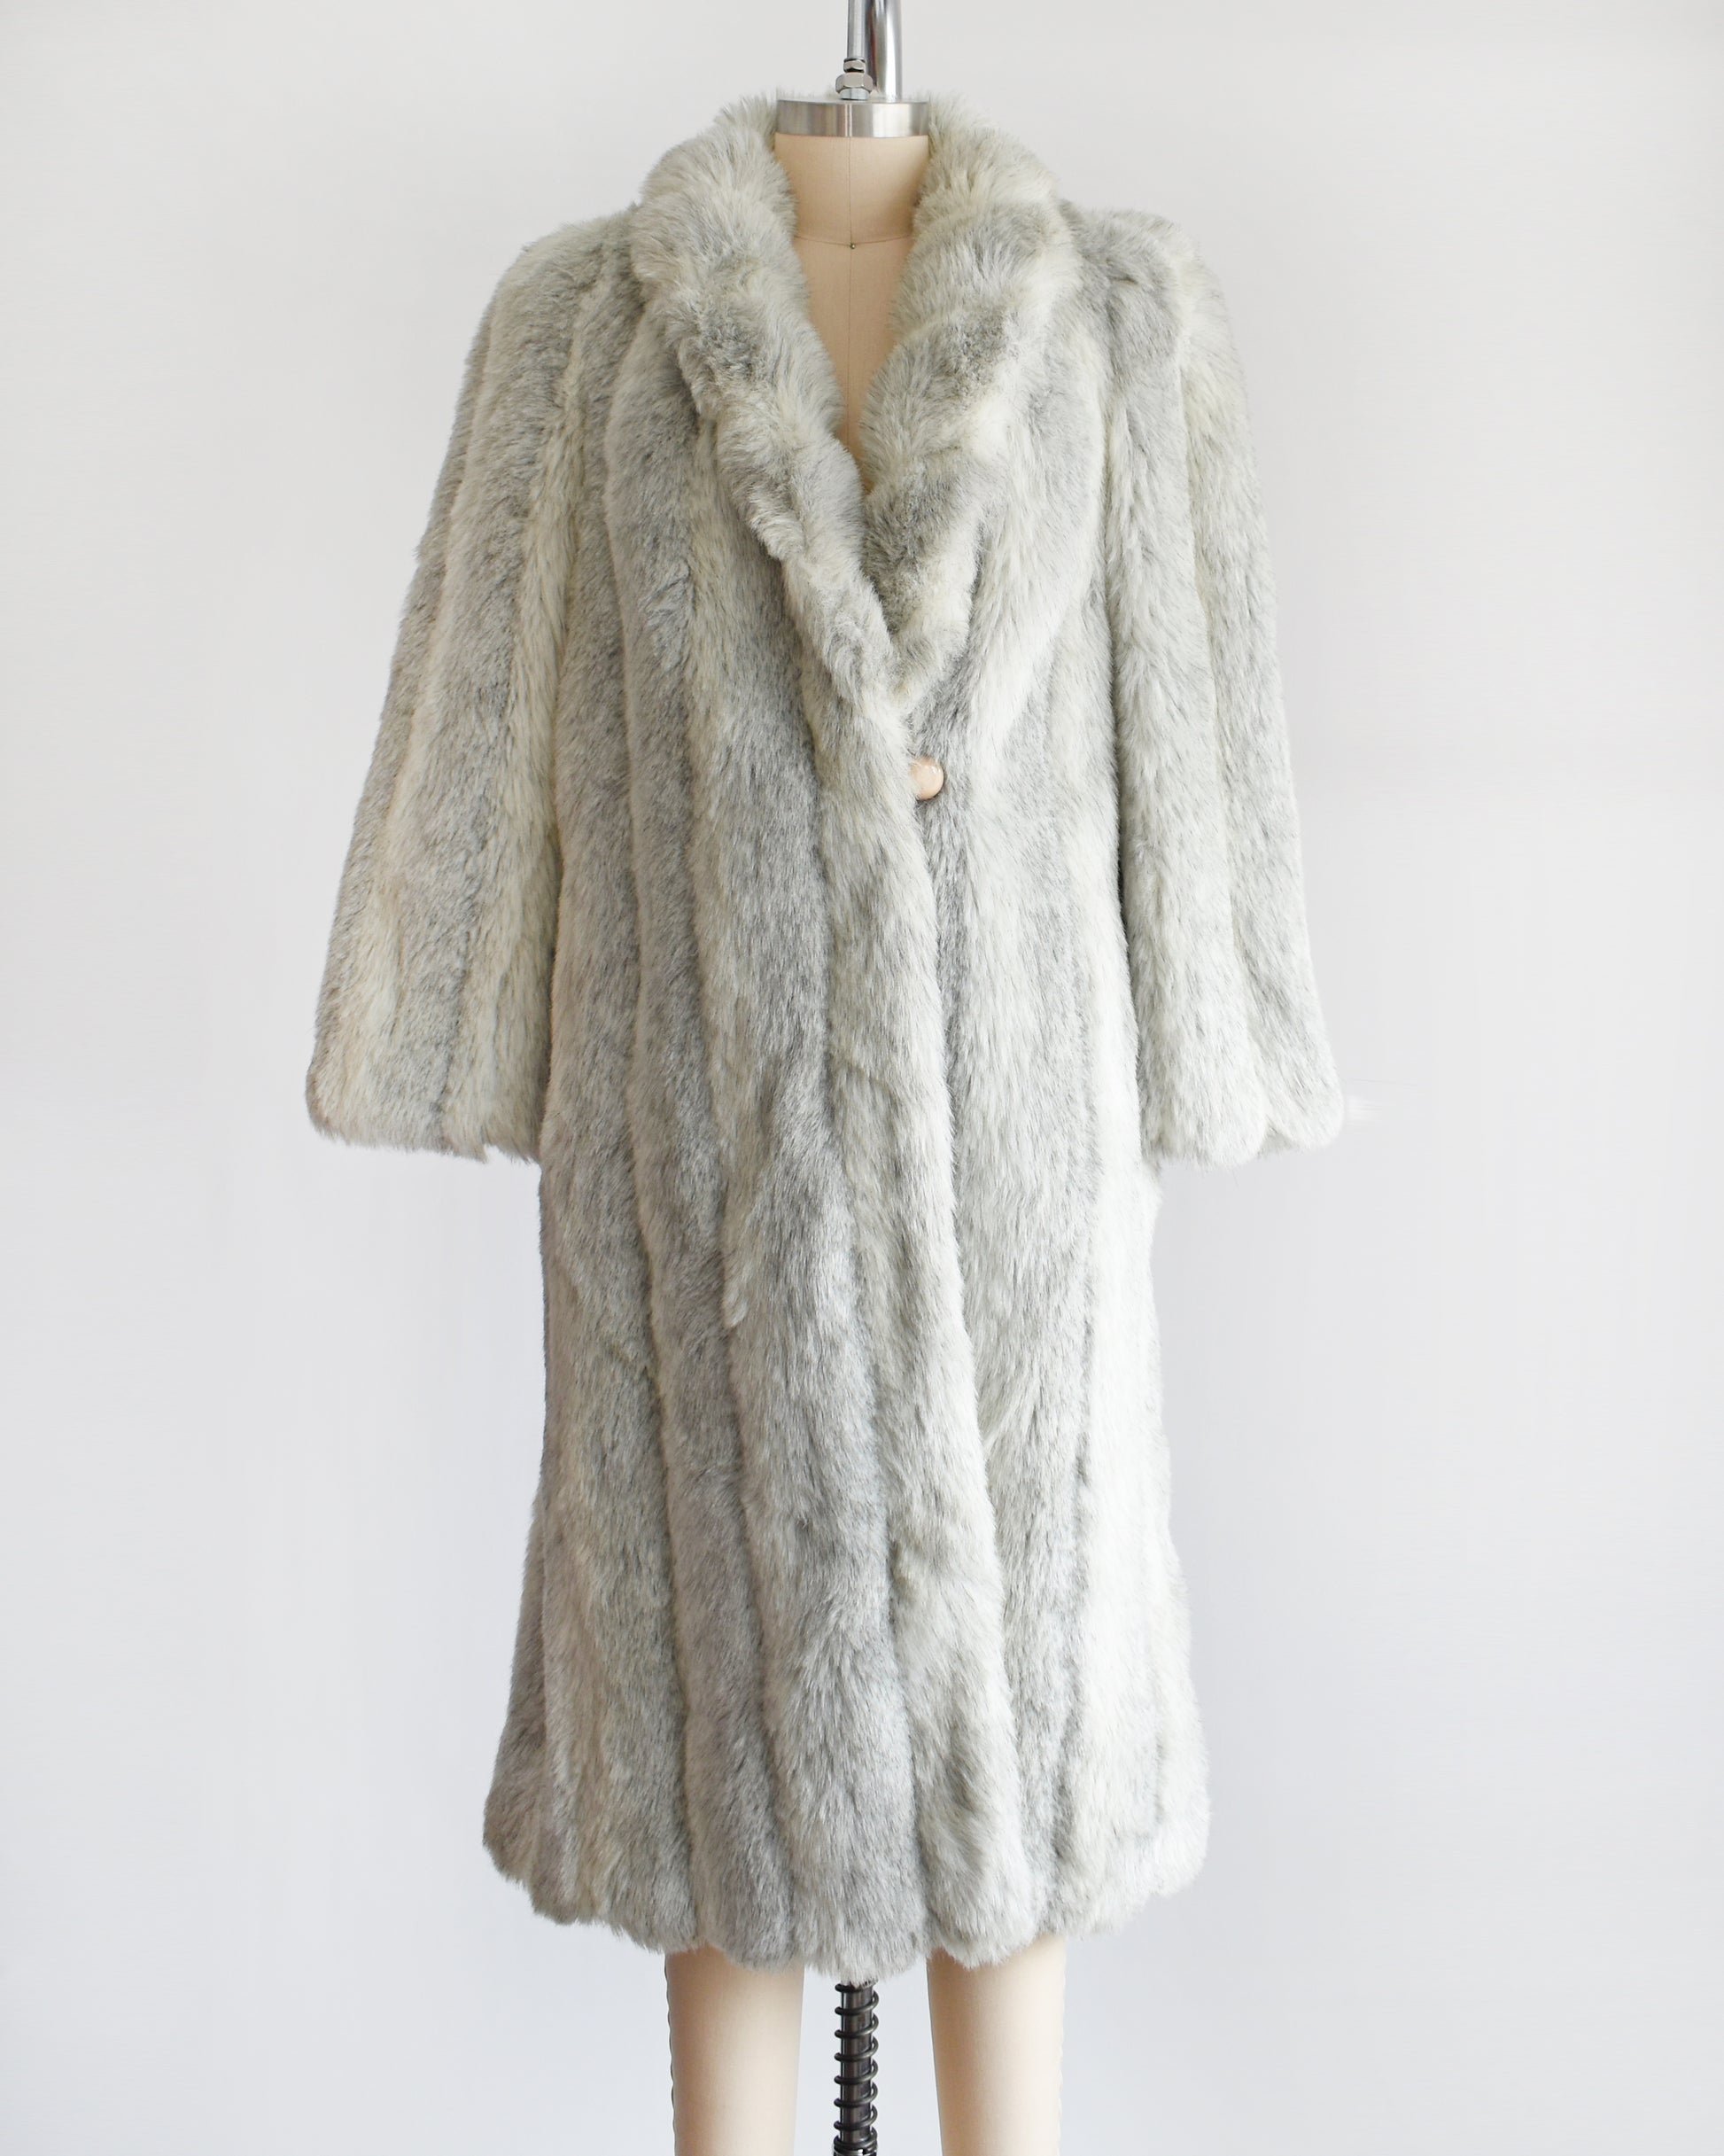 A vintage 1980s  cream colored faux fur coat with light and dark gray stripes.  The top button is unbuttoned in this photo.